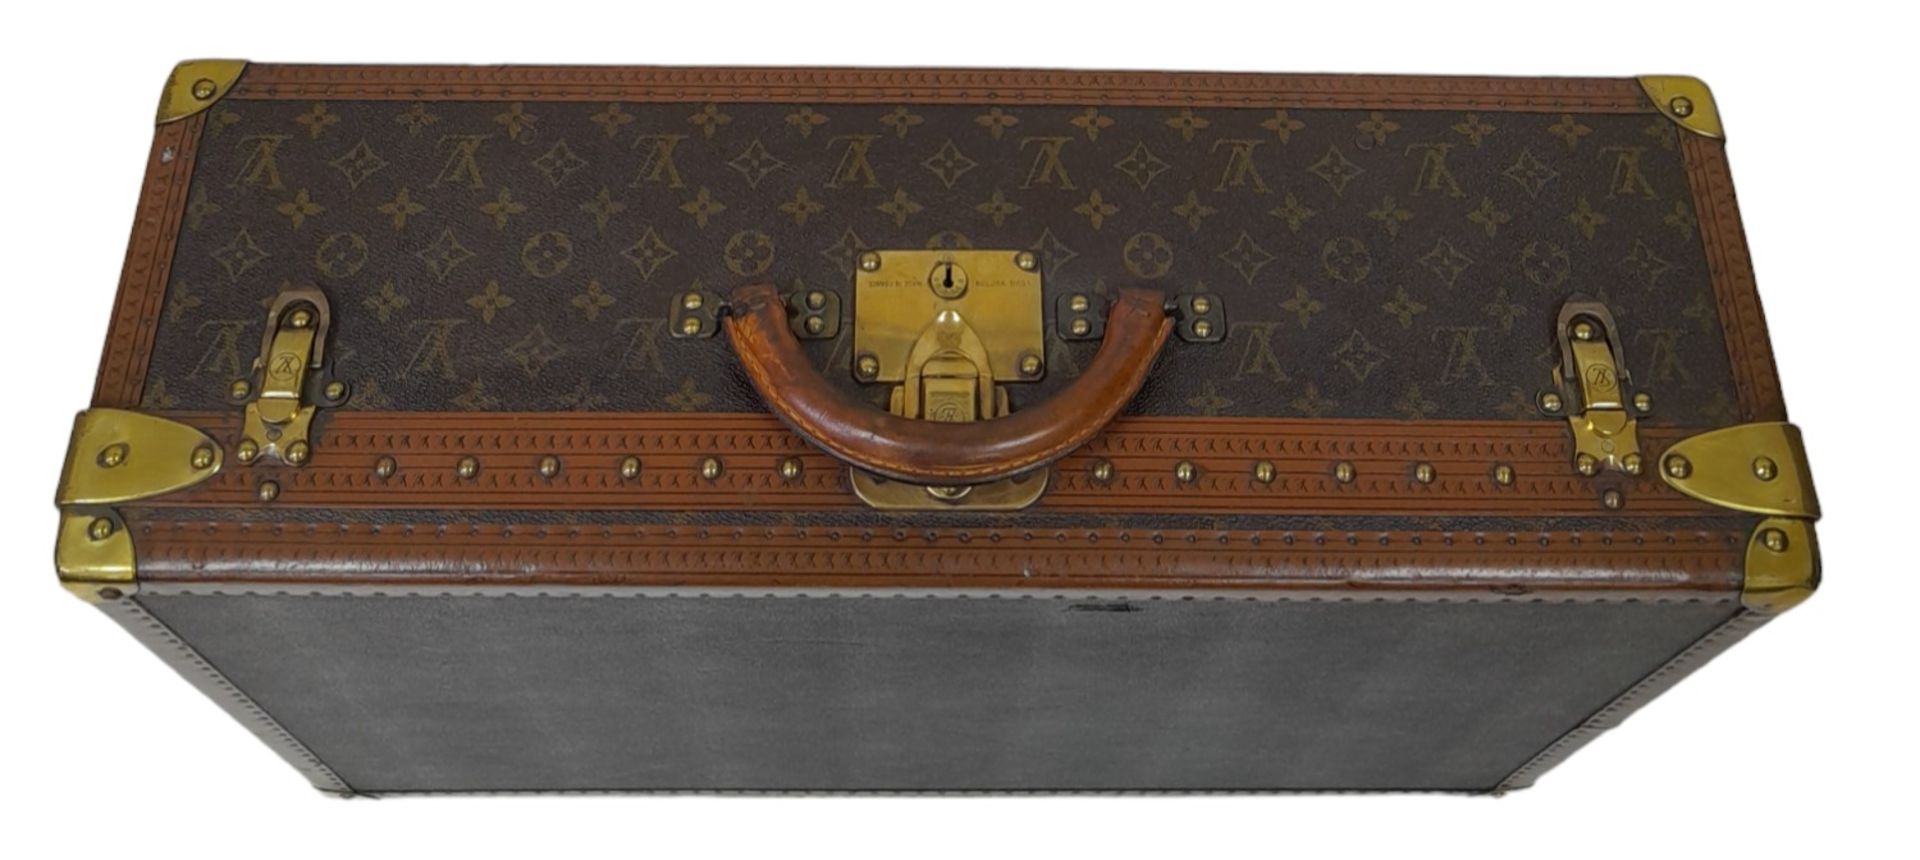 A Vintage Possibly Antique Louis Vuitton Trunk/Hard Suitcase. The smaller brother of Lot 38! - Bild 3 aus 12